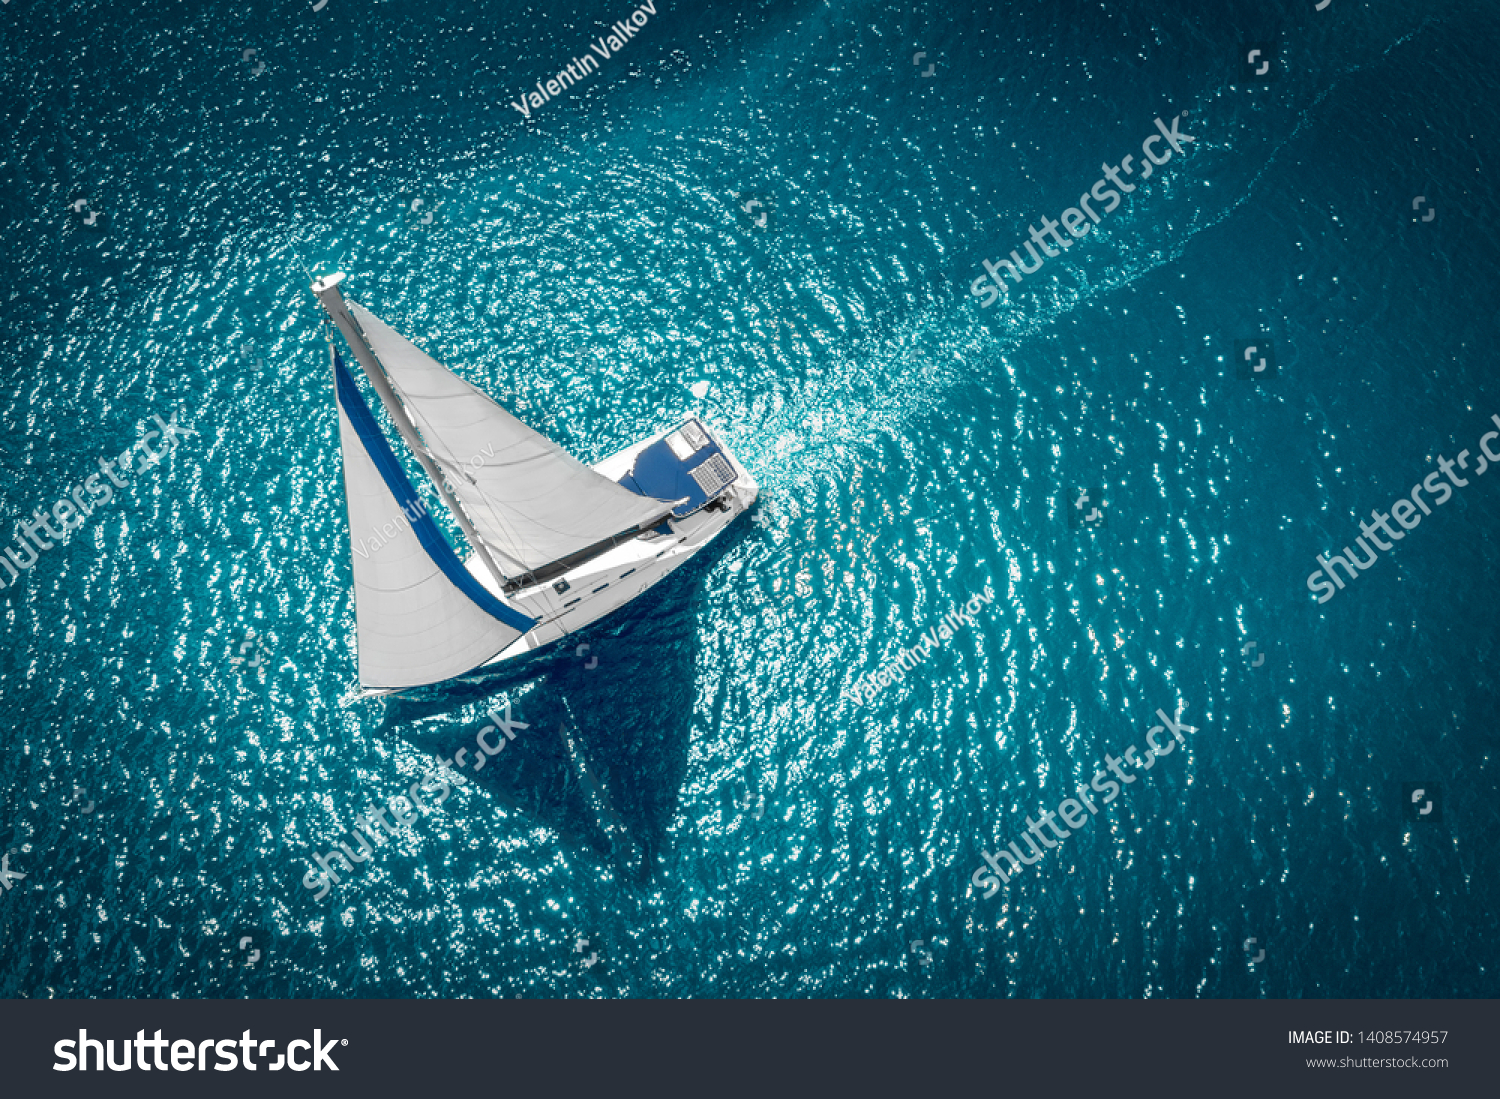 Regatta sailing ship yachts with white sails at opened sea. Aerial view of sailboat in windy condition. #1408574957